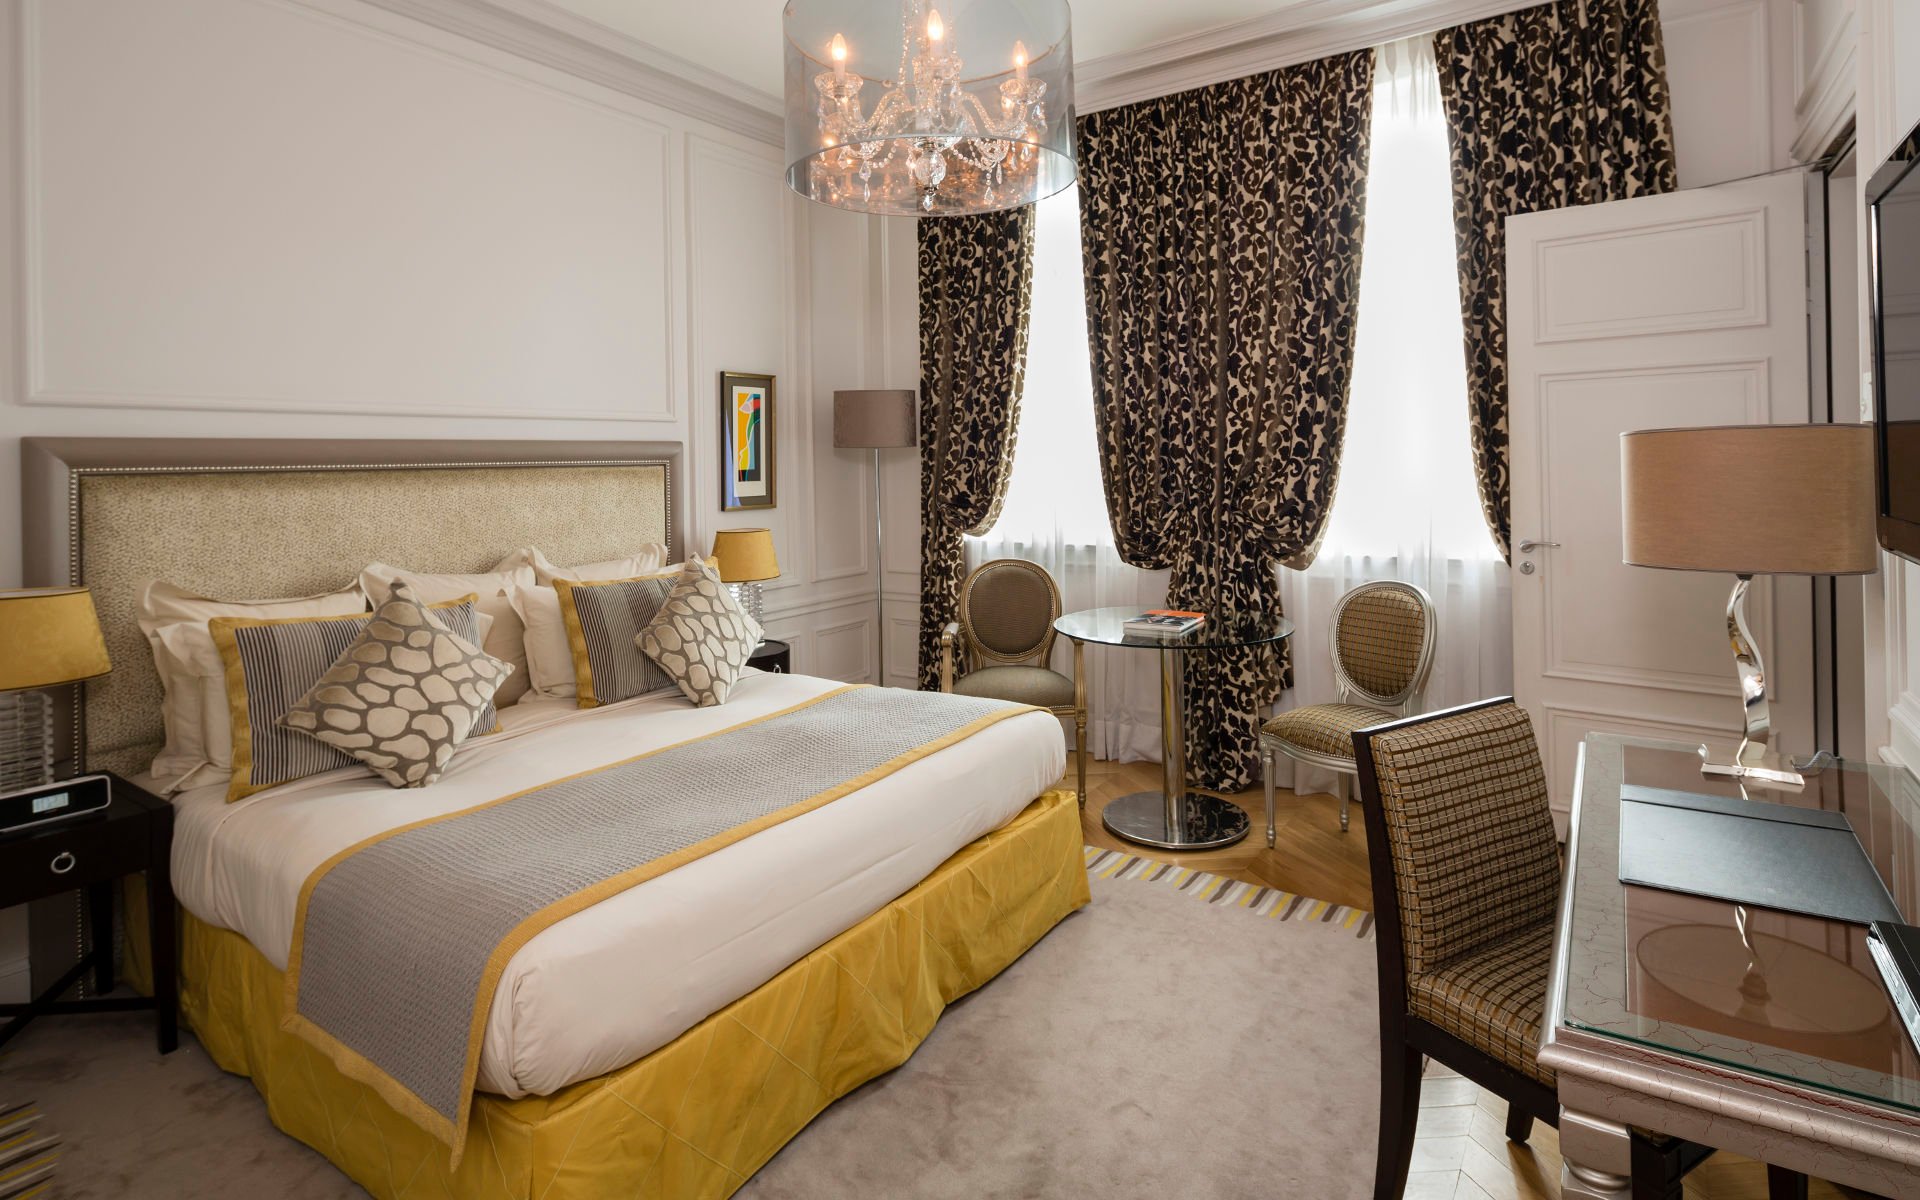 260/Rooms/Grand deluxe/Room Grand Deluxe 3-  Majestic Hotel-Spa.jpg